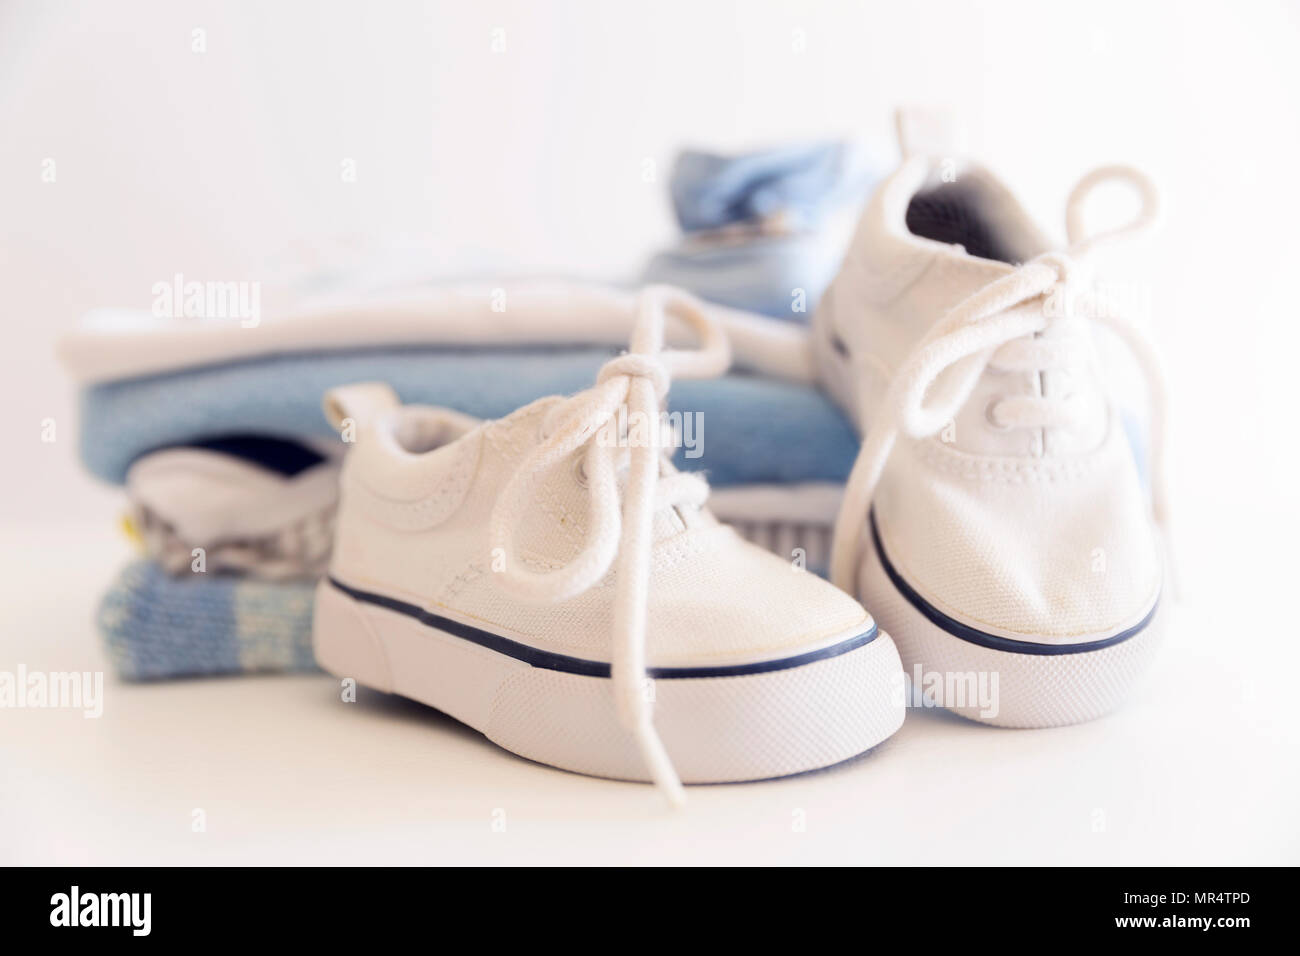 How to Buy the Best Baby & Toddler Shoes: From Crib to Walking –  SophiasStyle.com